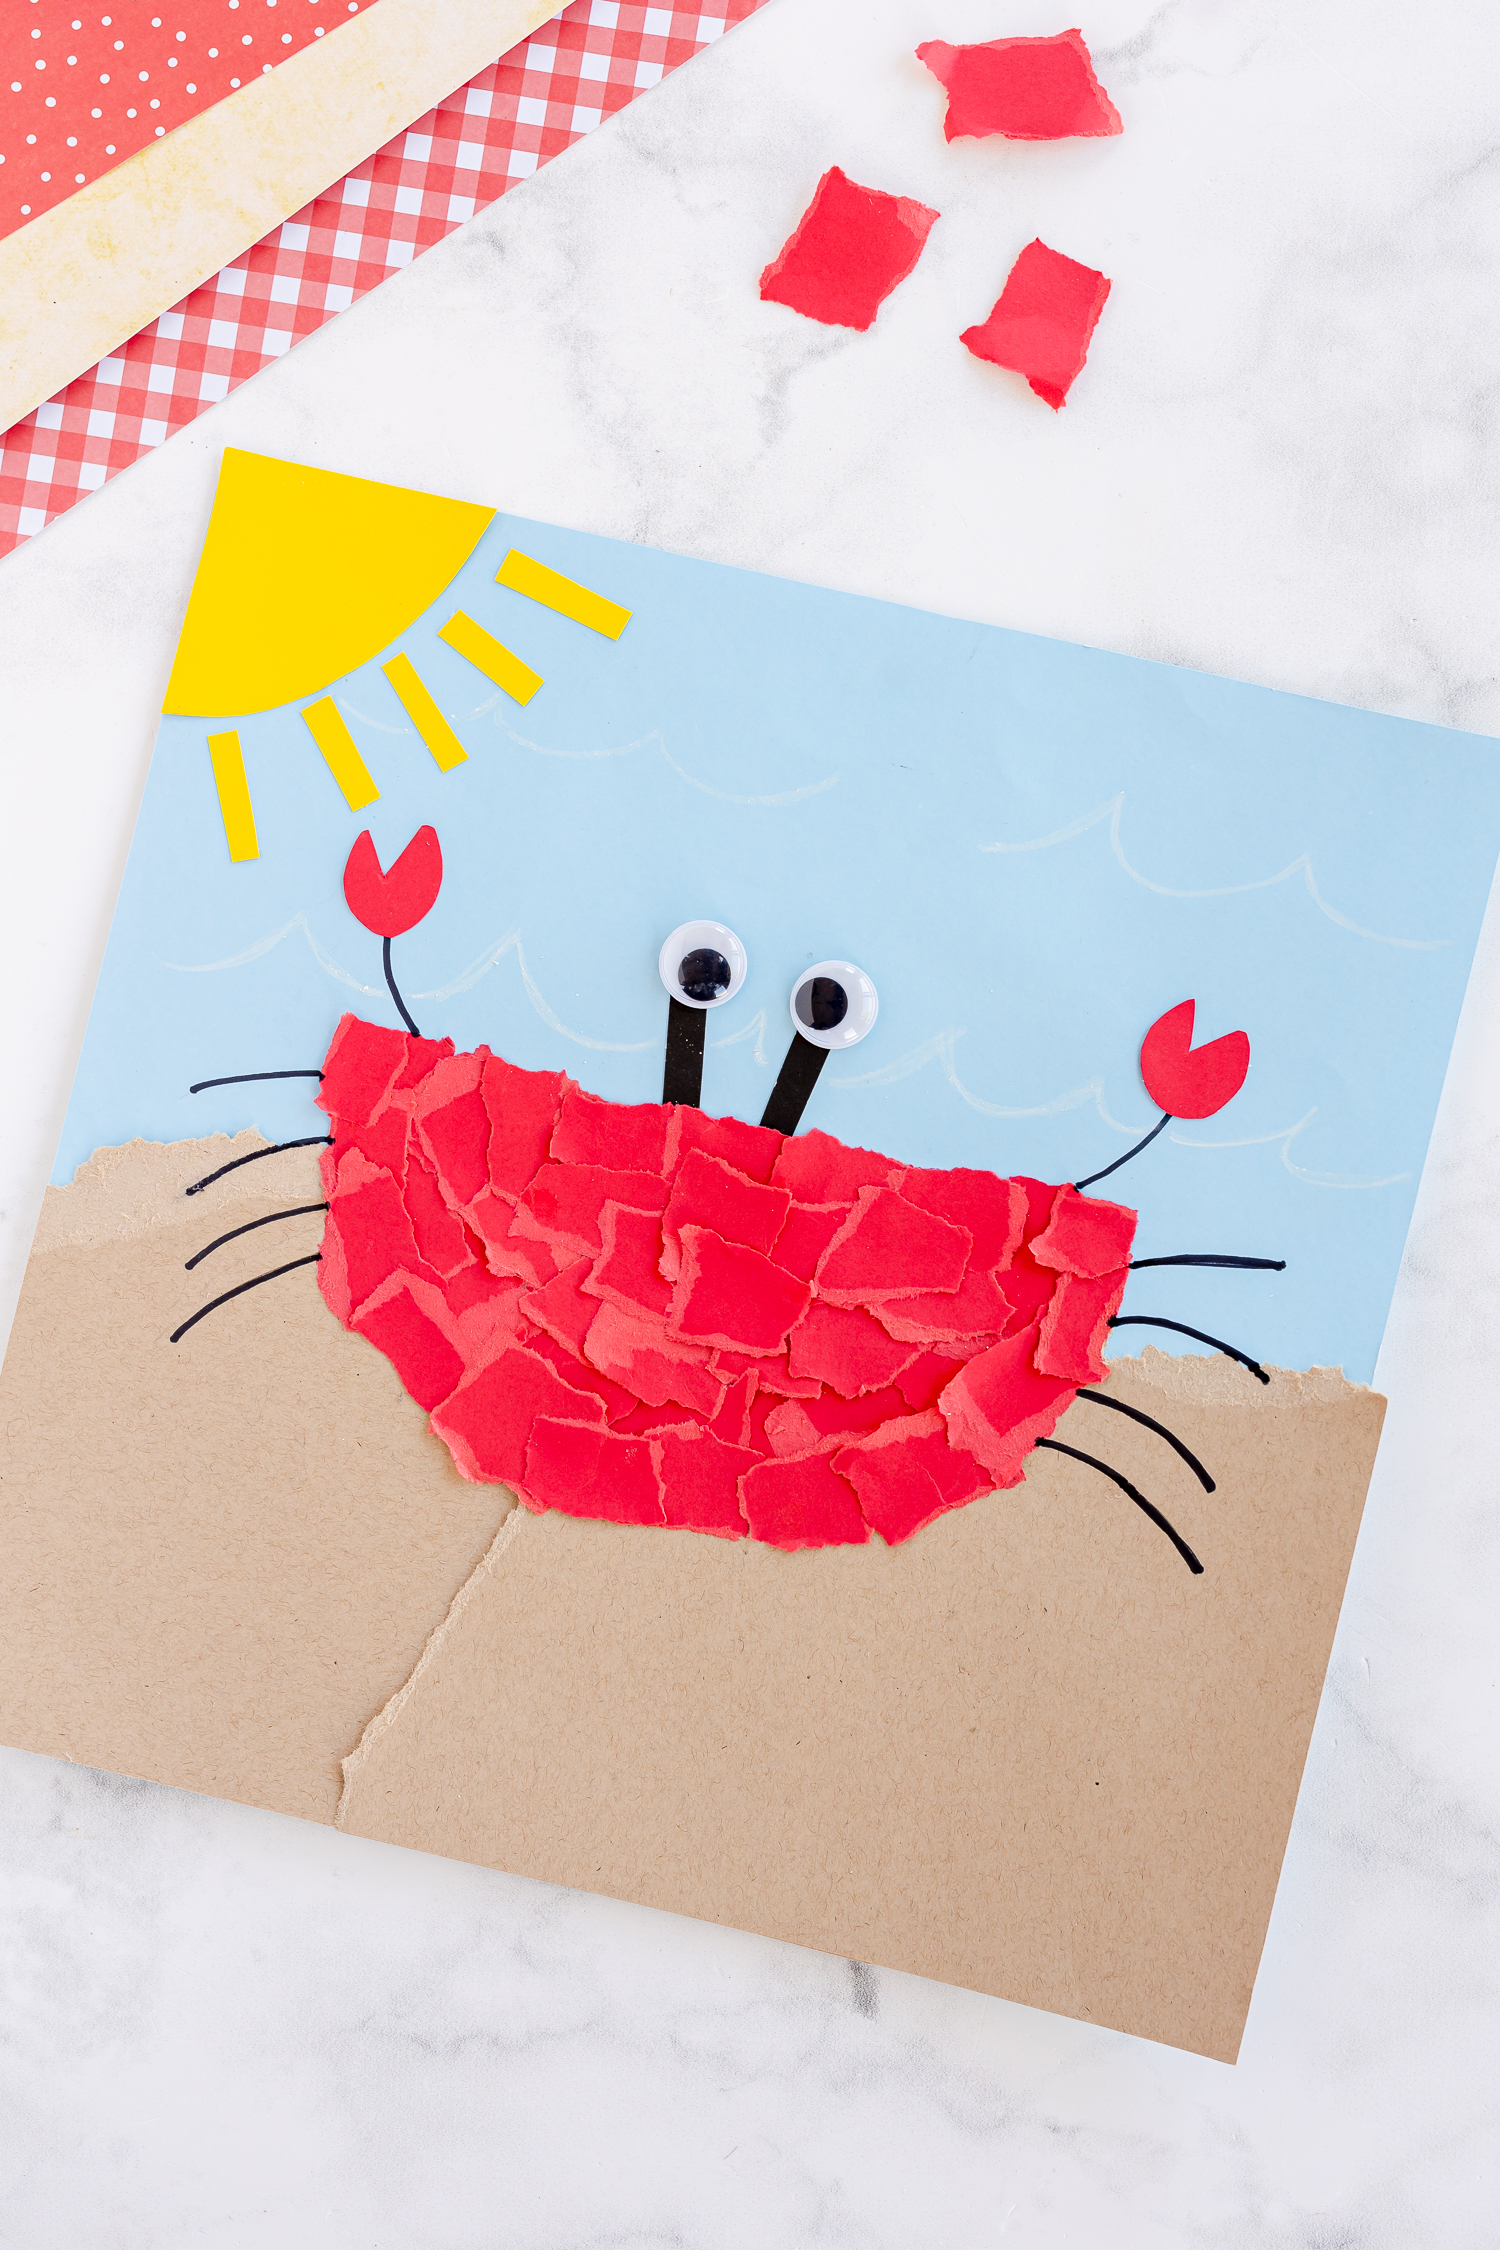 crab craft with torn paper pieces